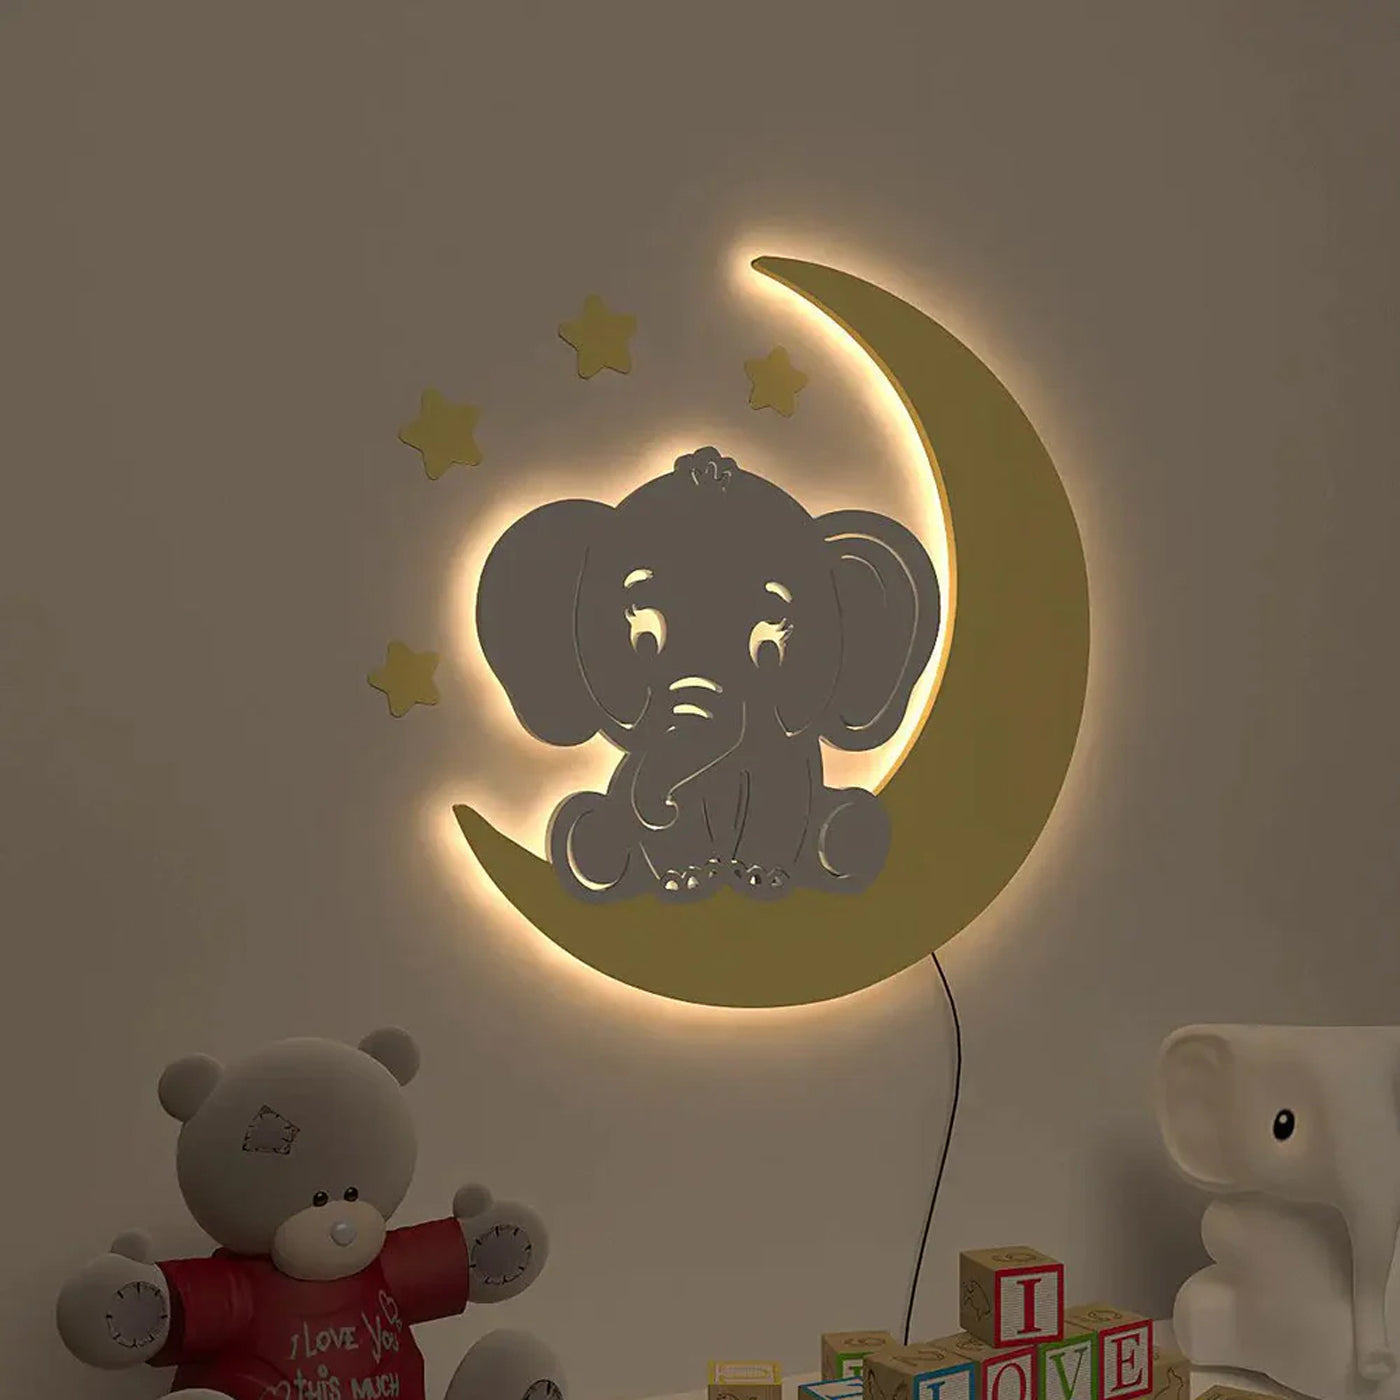 Baby Elephant on Moon Night Light Wooden wall Mounted Decorative Backlit for Kids Room Décor